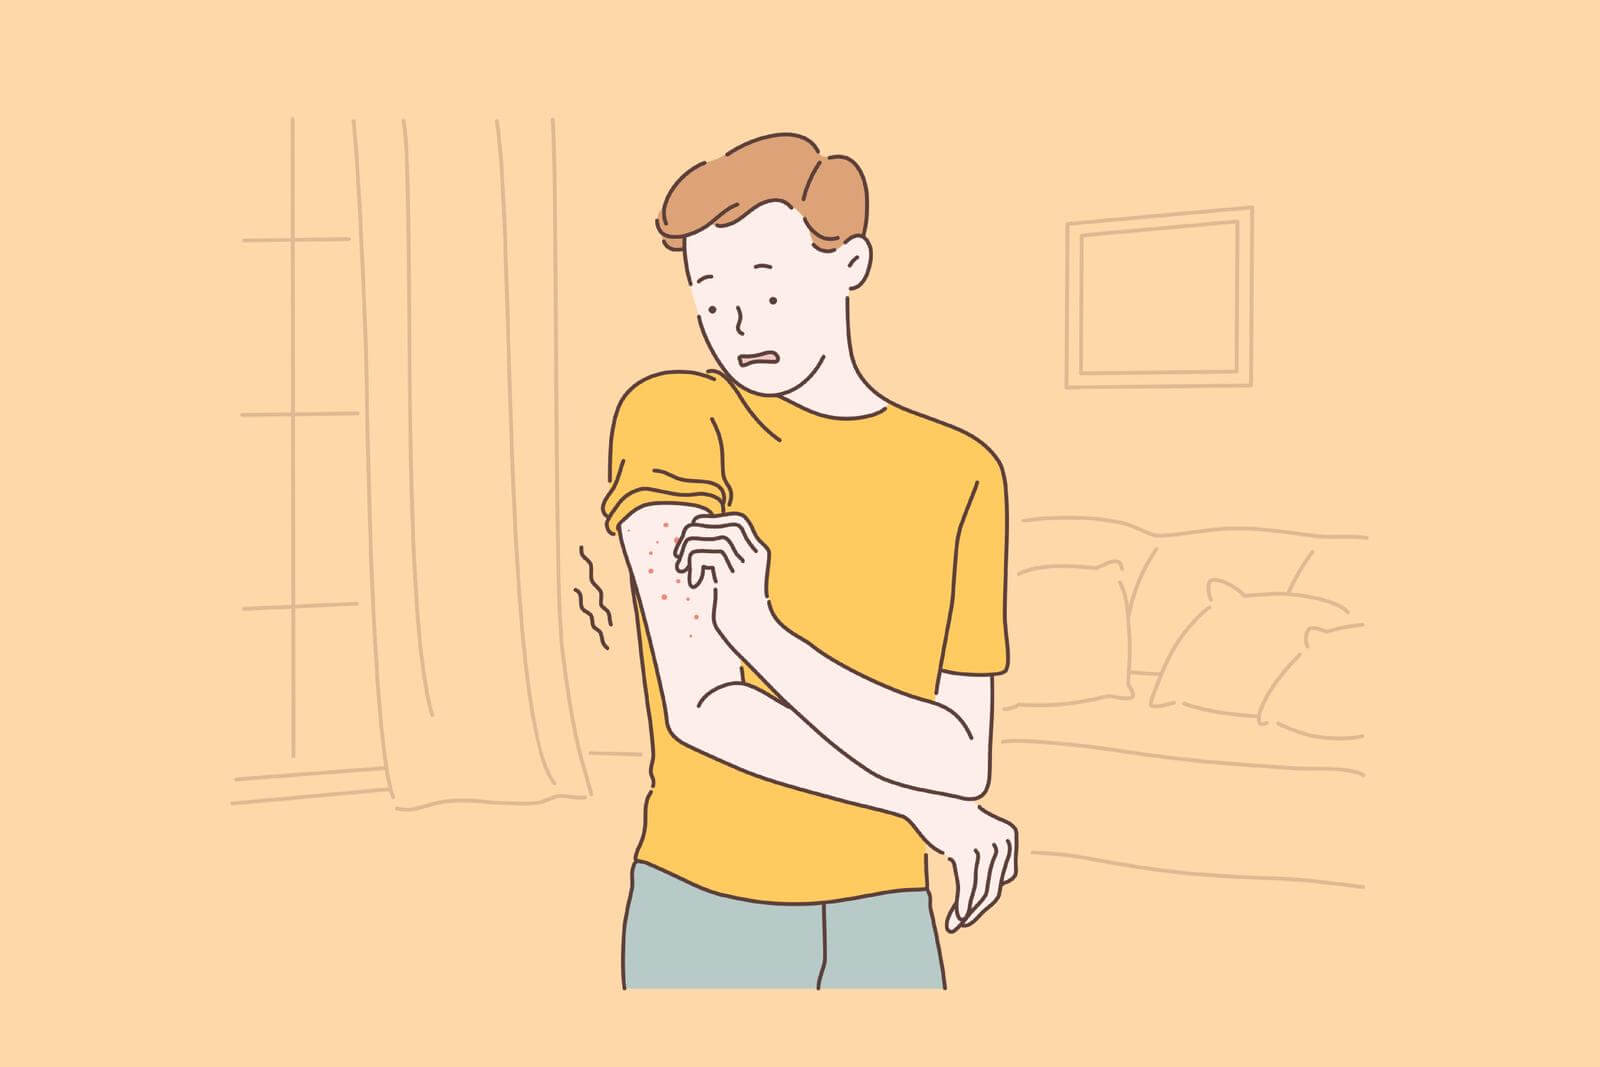 Patient allergic reaction, eczema symptoms concept. Man with rash on arm, scared boy scratching itch pimples, frightened guy skin irritation in ankle area. Simple flat vector